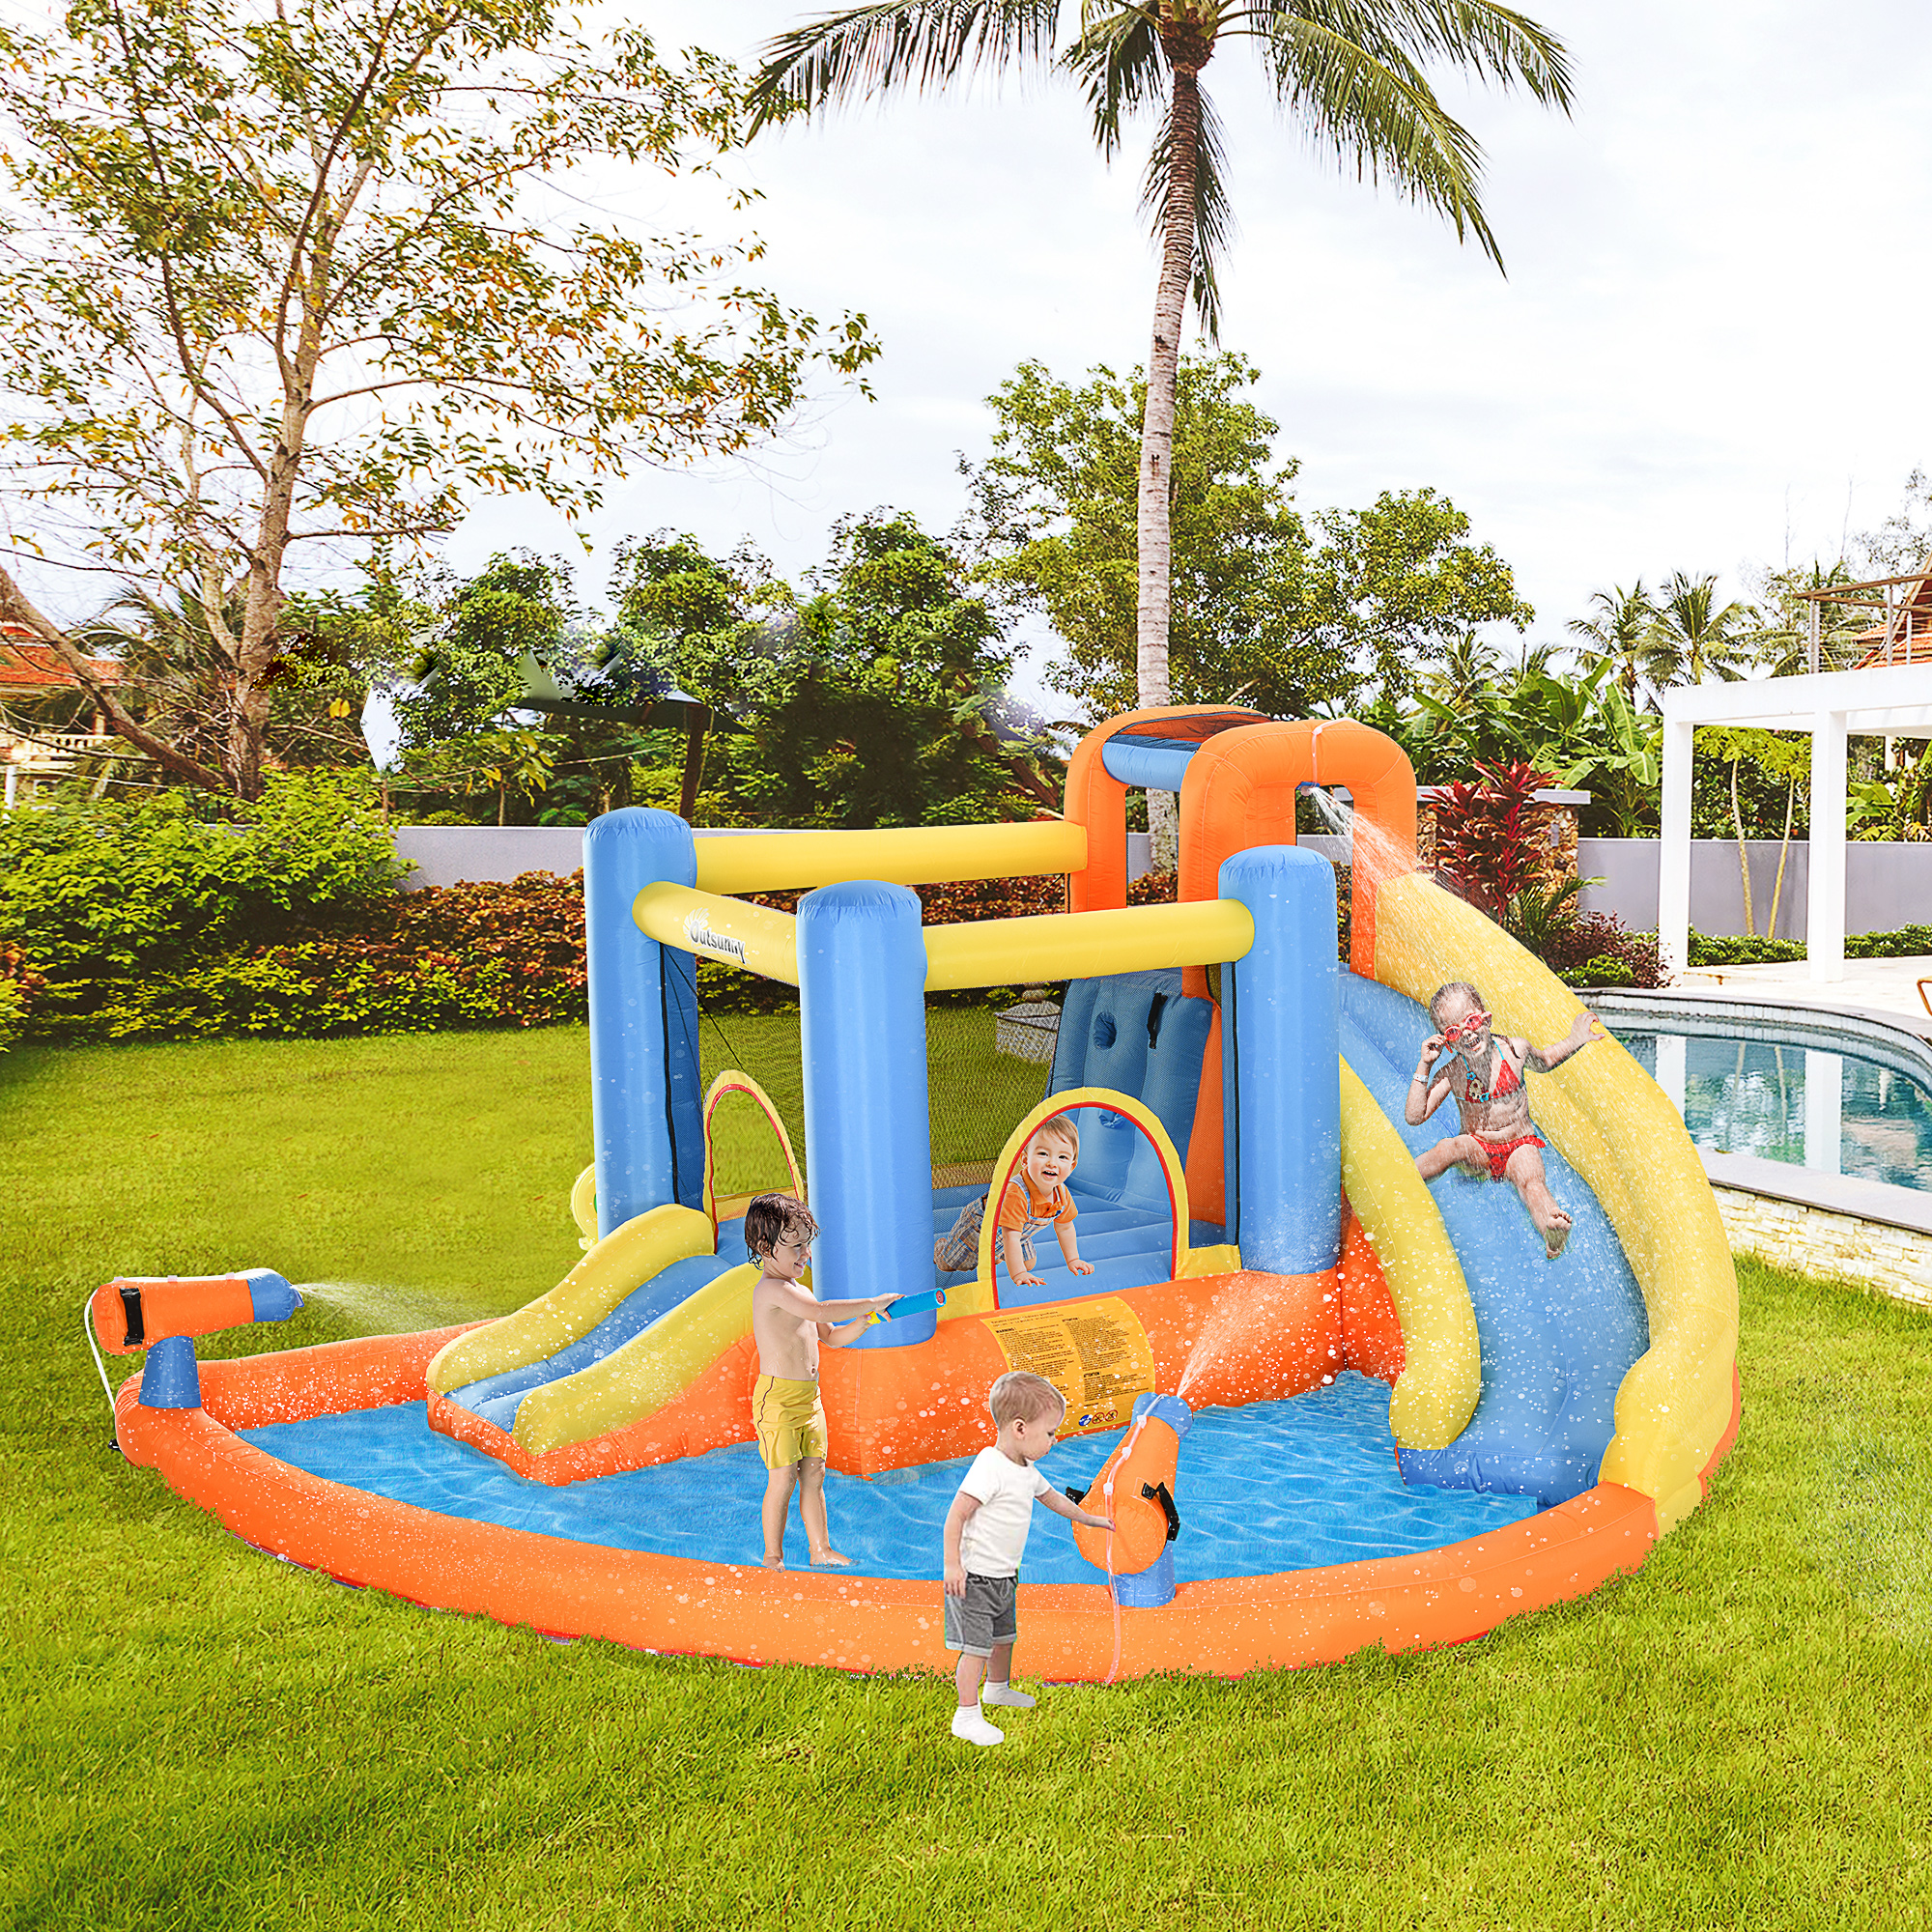 Outsunny Kids Inflatable Water Slide 5-in-1 Bounce House Water Park Jumping Castle with Water Pool, Slide, Climbing Walls, & 2 Water Cannons, 450W Air Blower - image 2 of 9